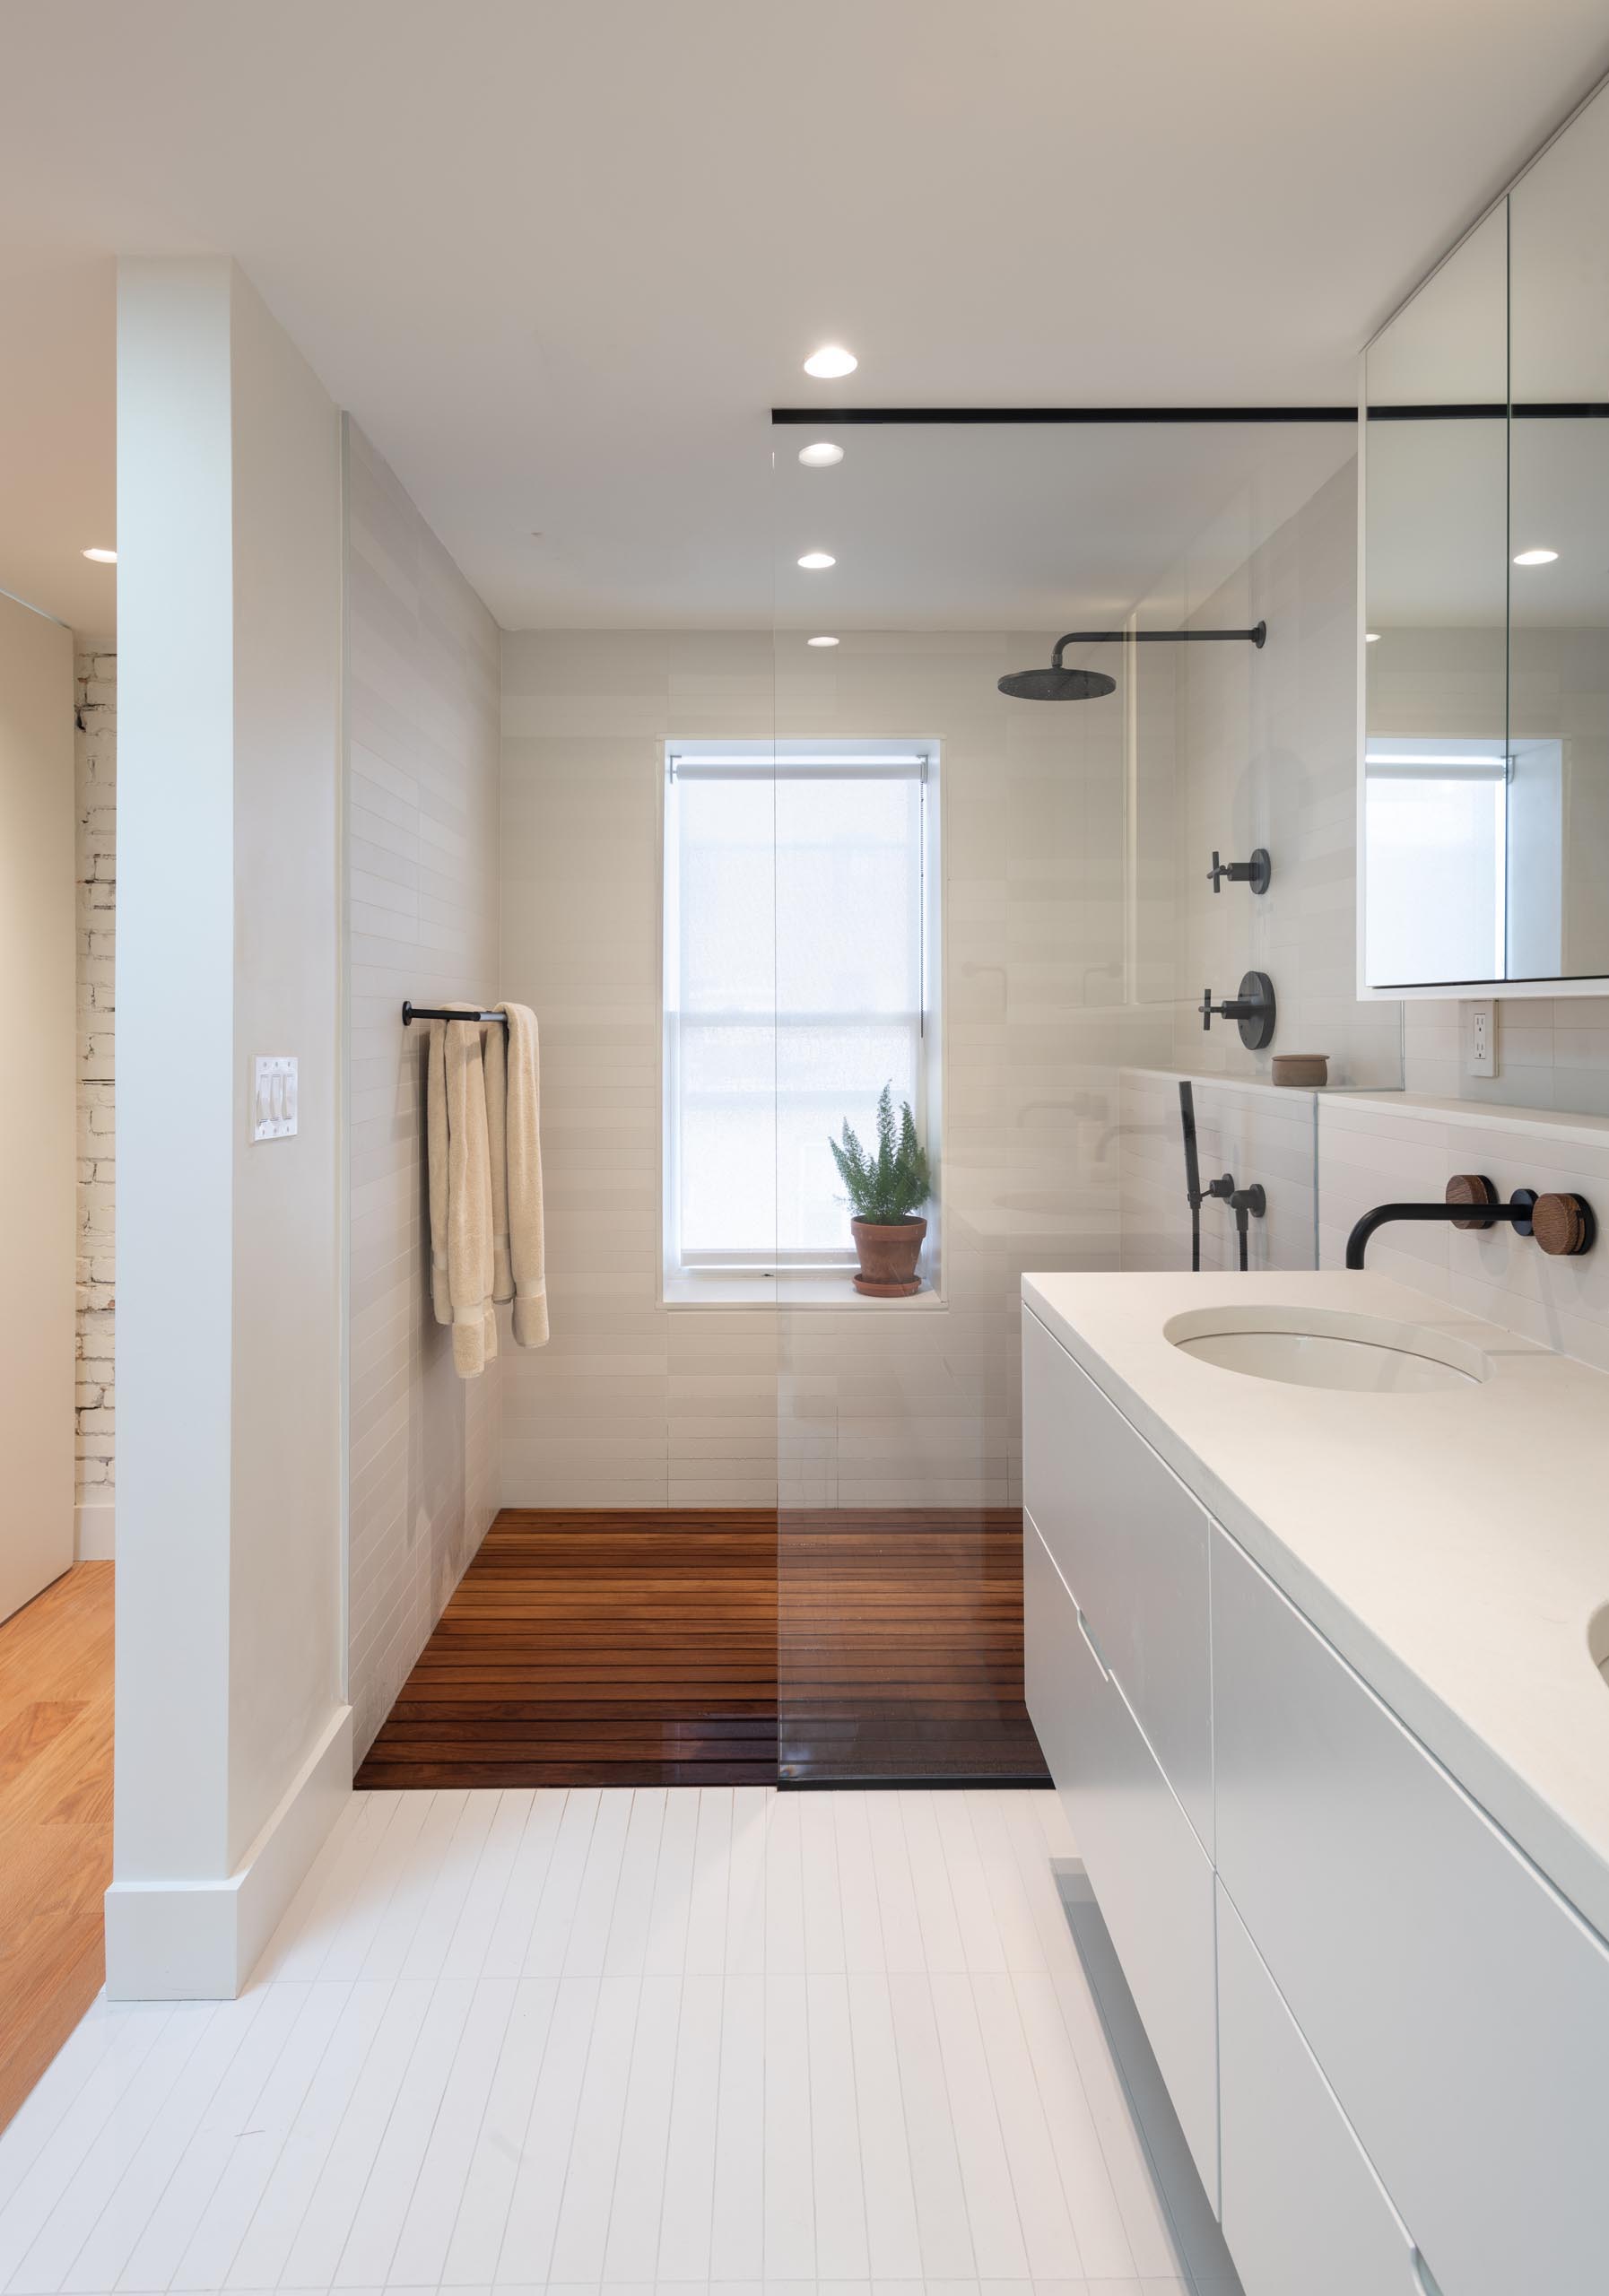 A modern bathroom with a floating white vanity, a walk-in shower with wood floor, and black accents.